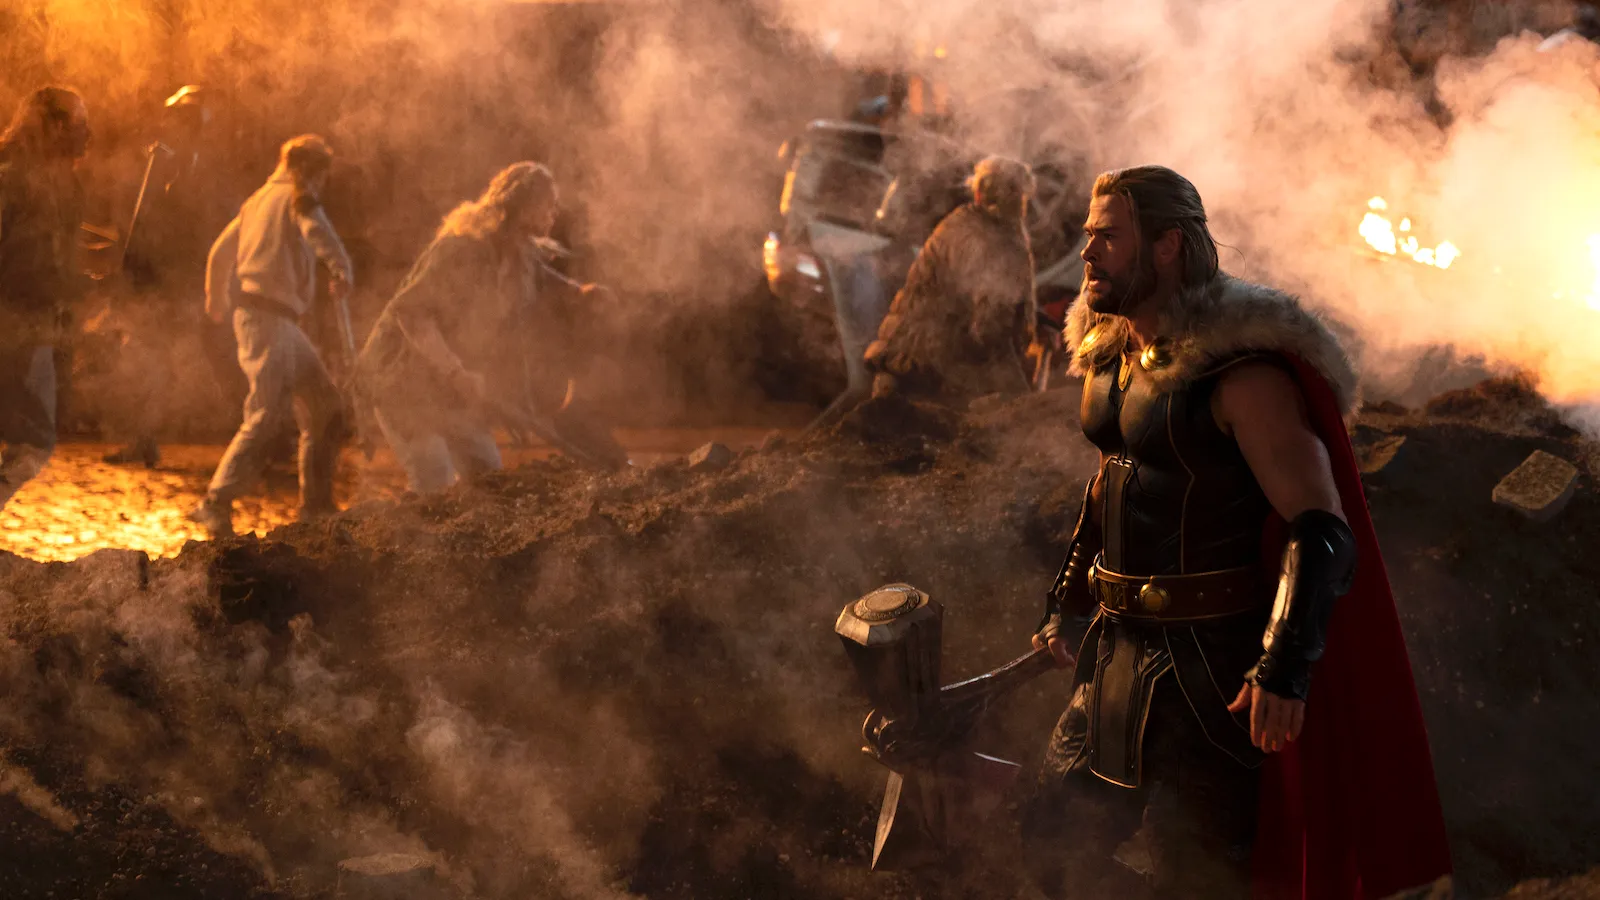 Will Thor And Saxa Get Together Because of A Child?